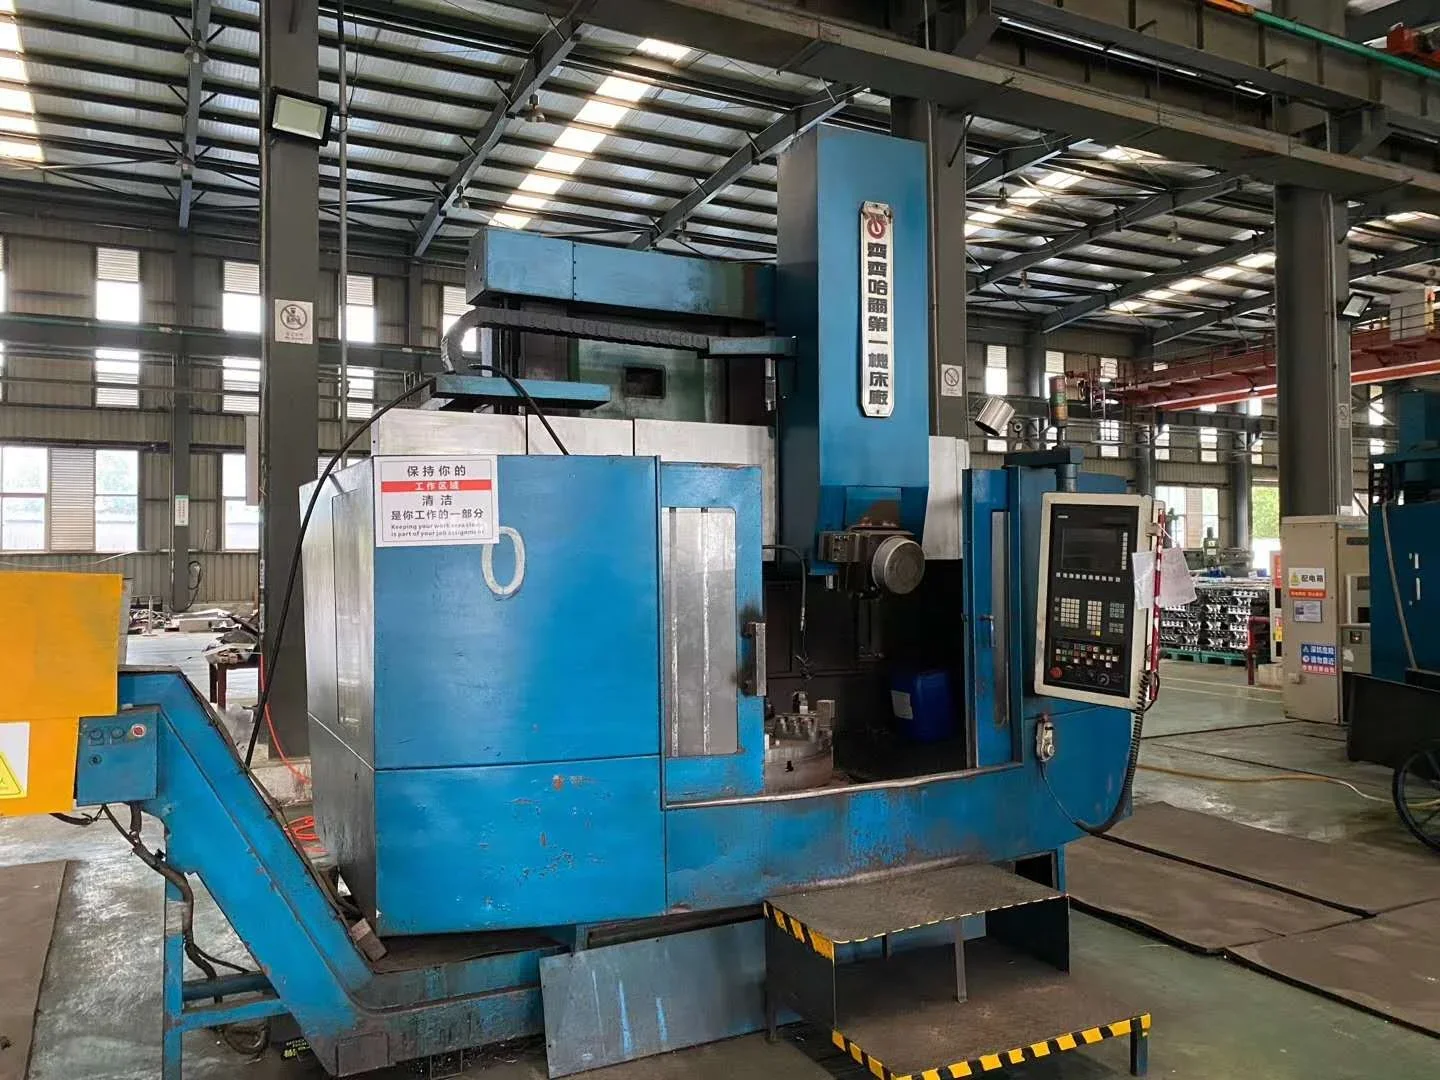 Used vertical lathe machines